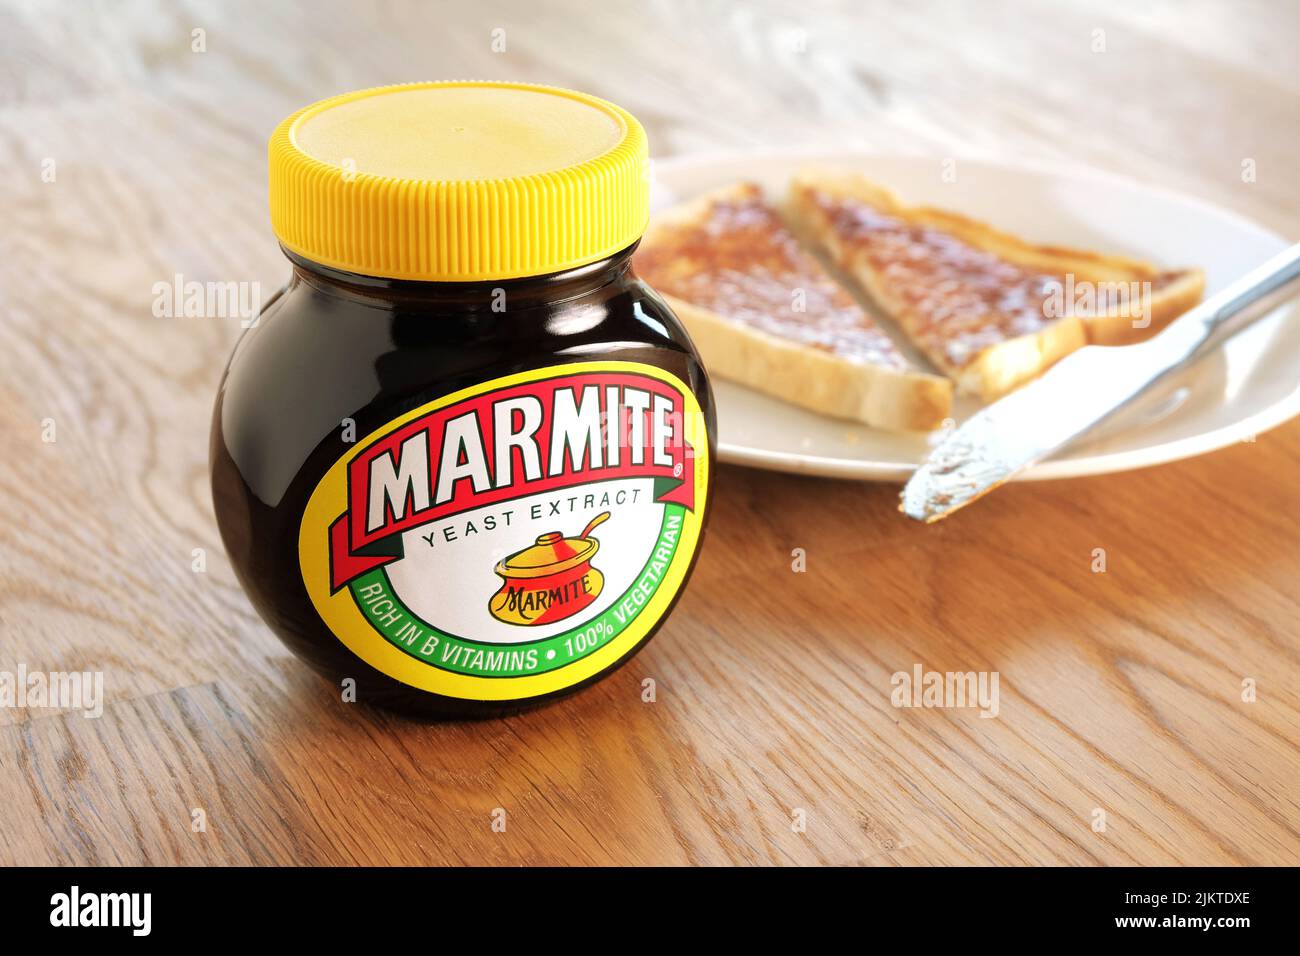 April 22nd, 2015: Jar of Marmite, unopened on wooden table top. Slice of toast on a white plate in background. Stock Photo